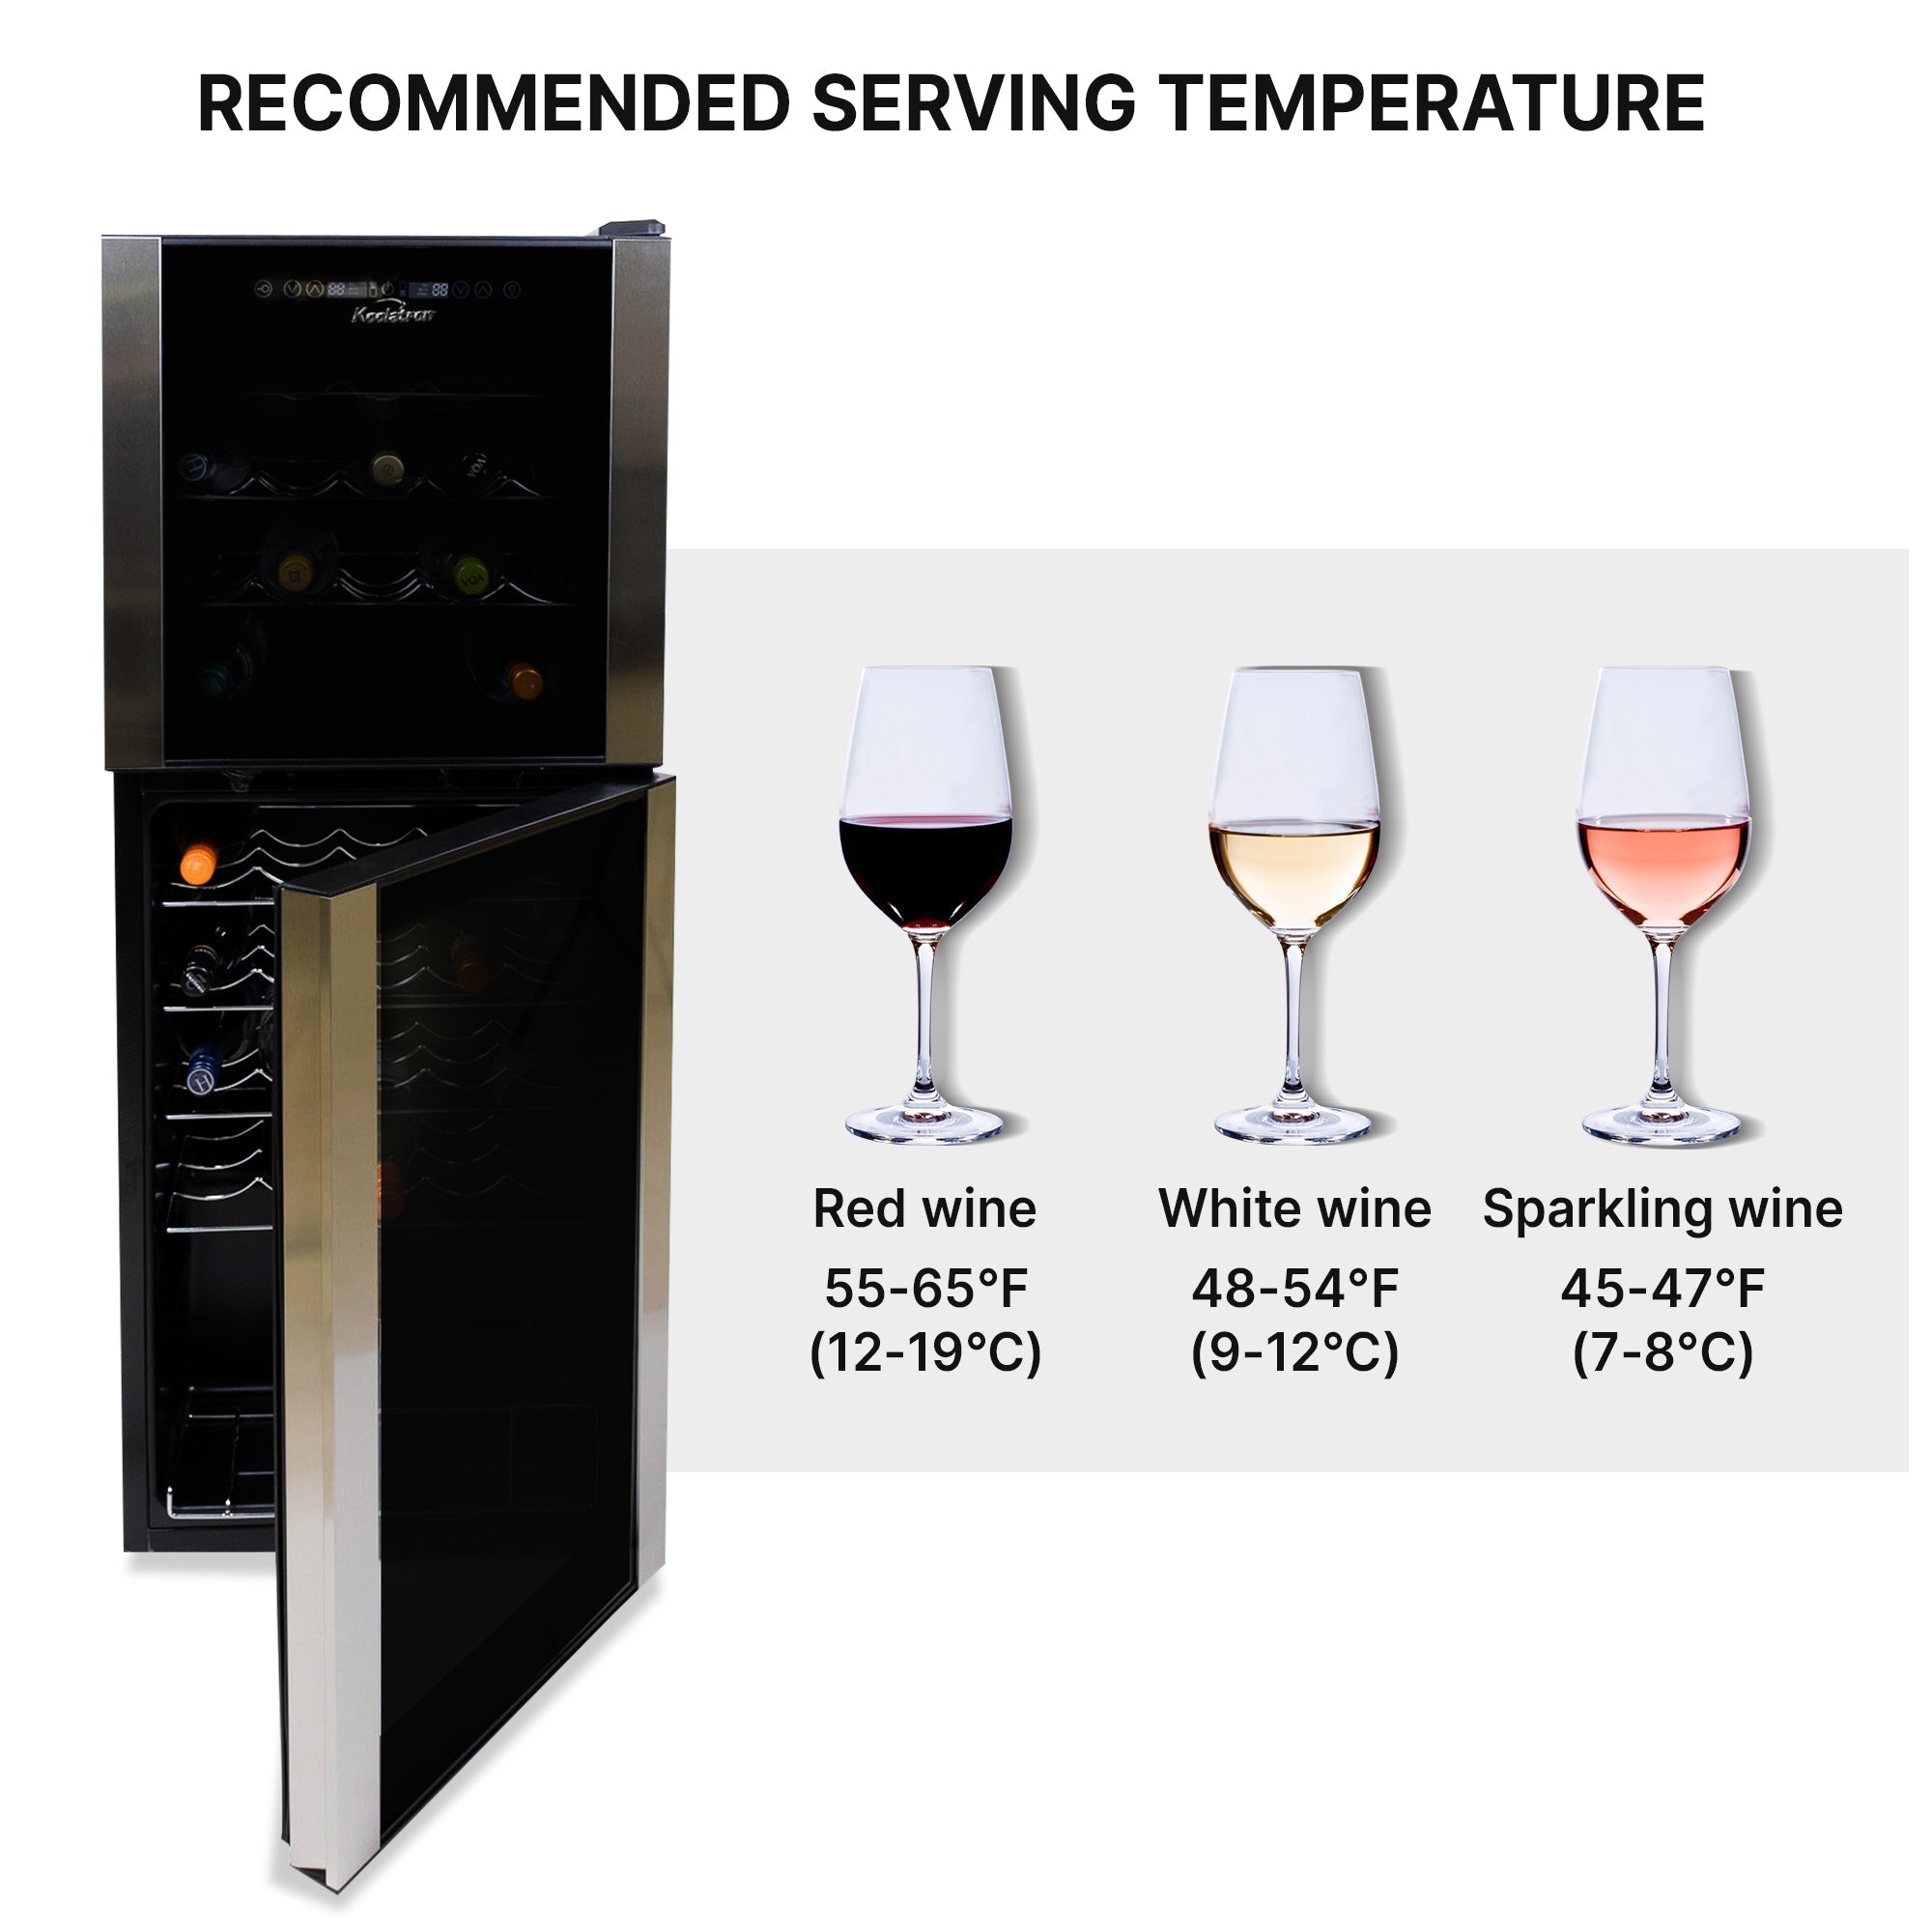 Koolatron 45 bottle compressor wine fridge, open, with pictures of three wine glasses to the right containing red, white, and rose wines; Text above reads "Recommended serving temperature" and text below each glass describes the ideal temperature